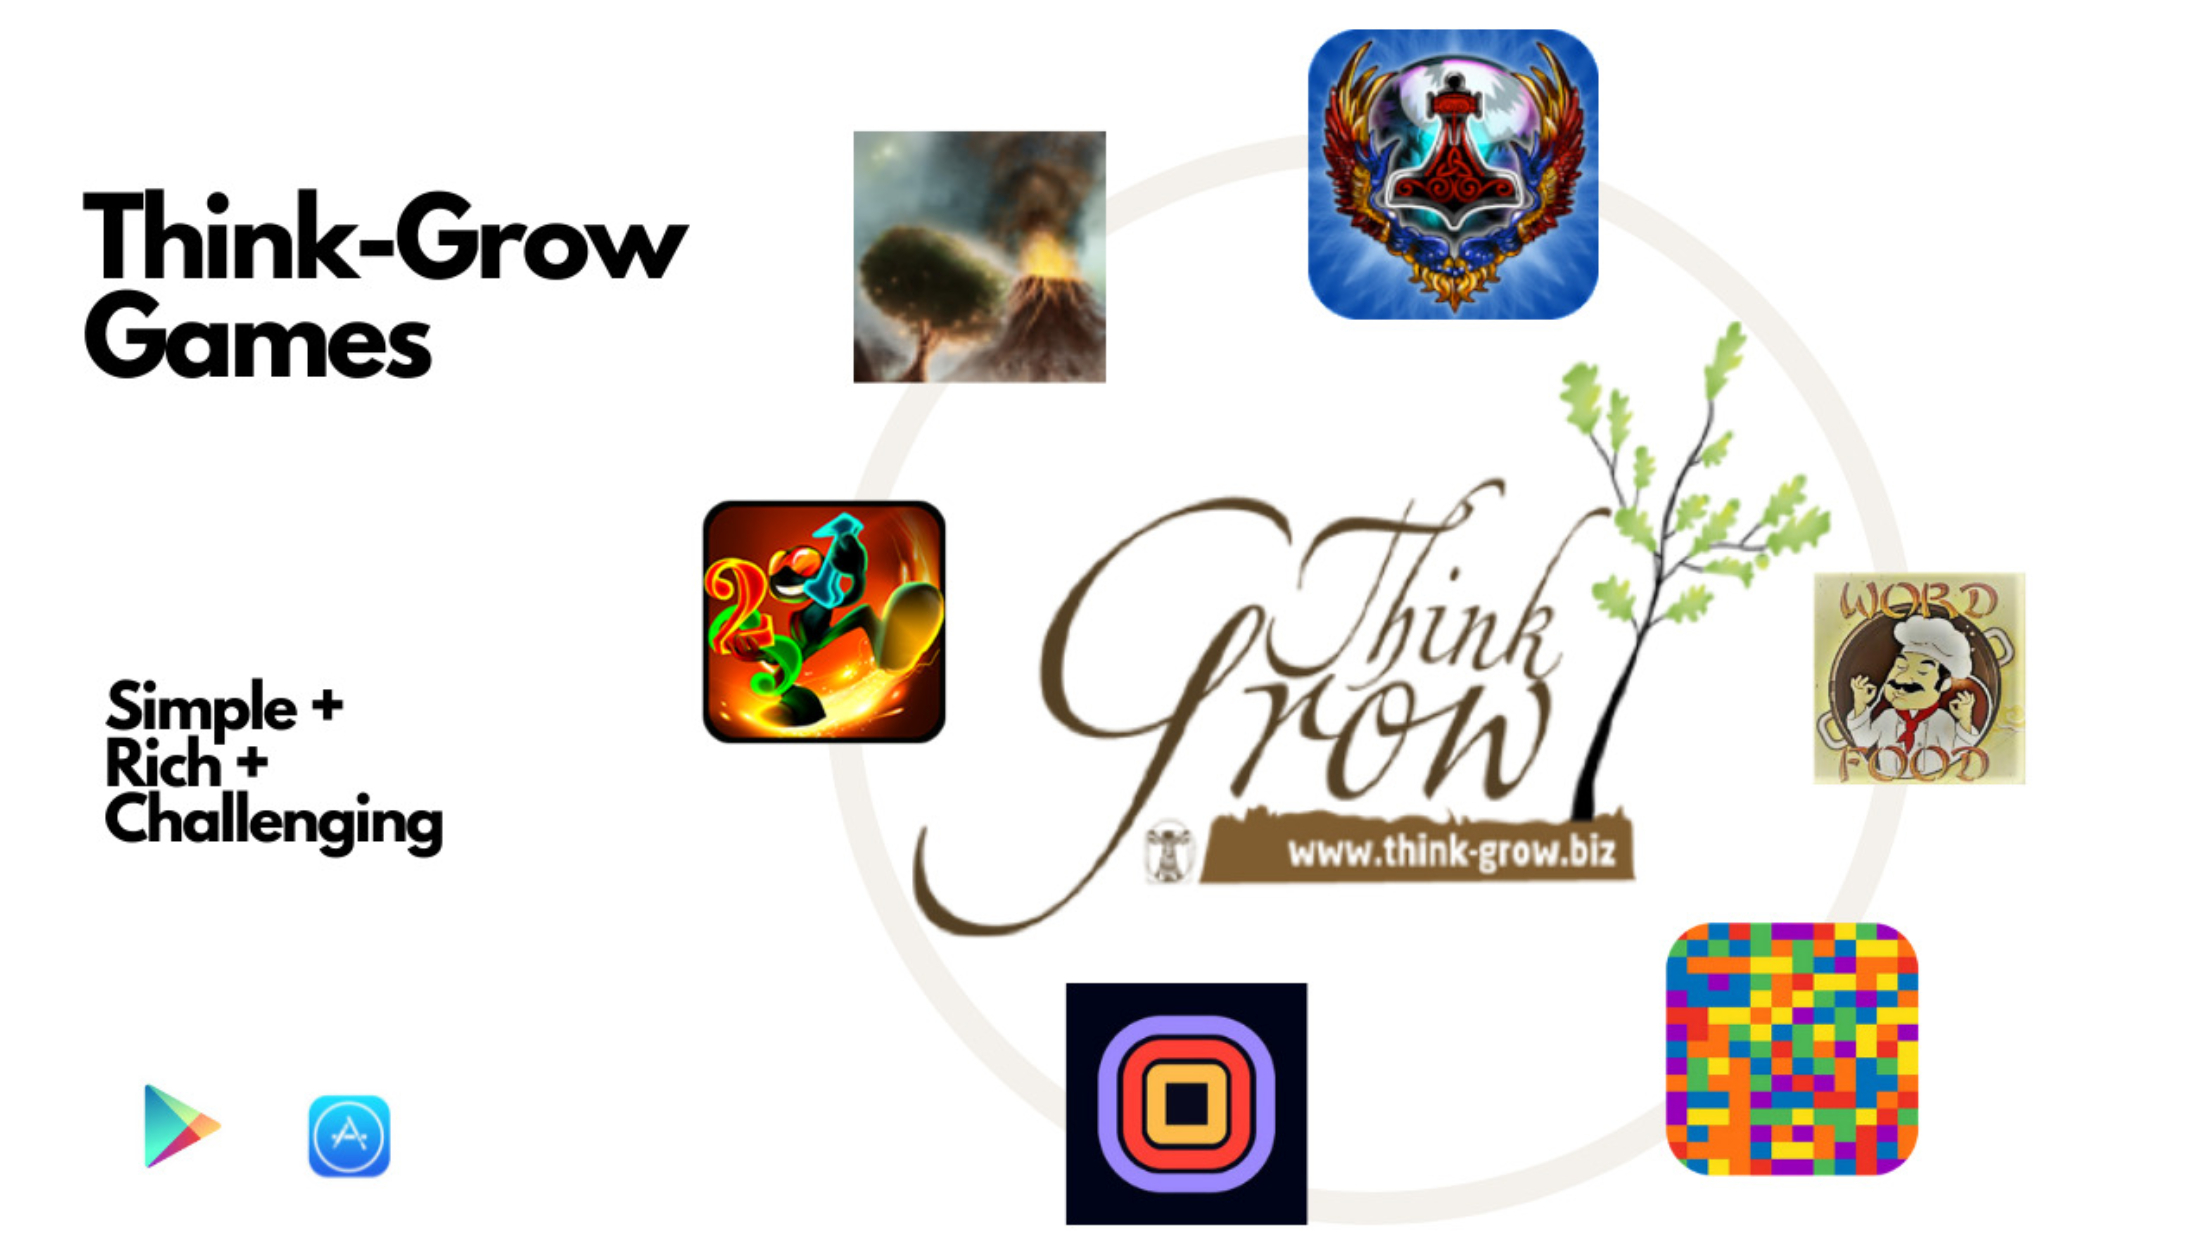 Think-Grow Games